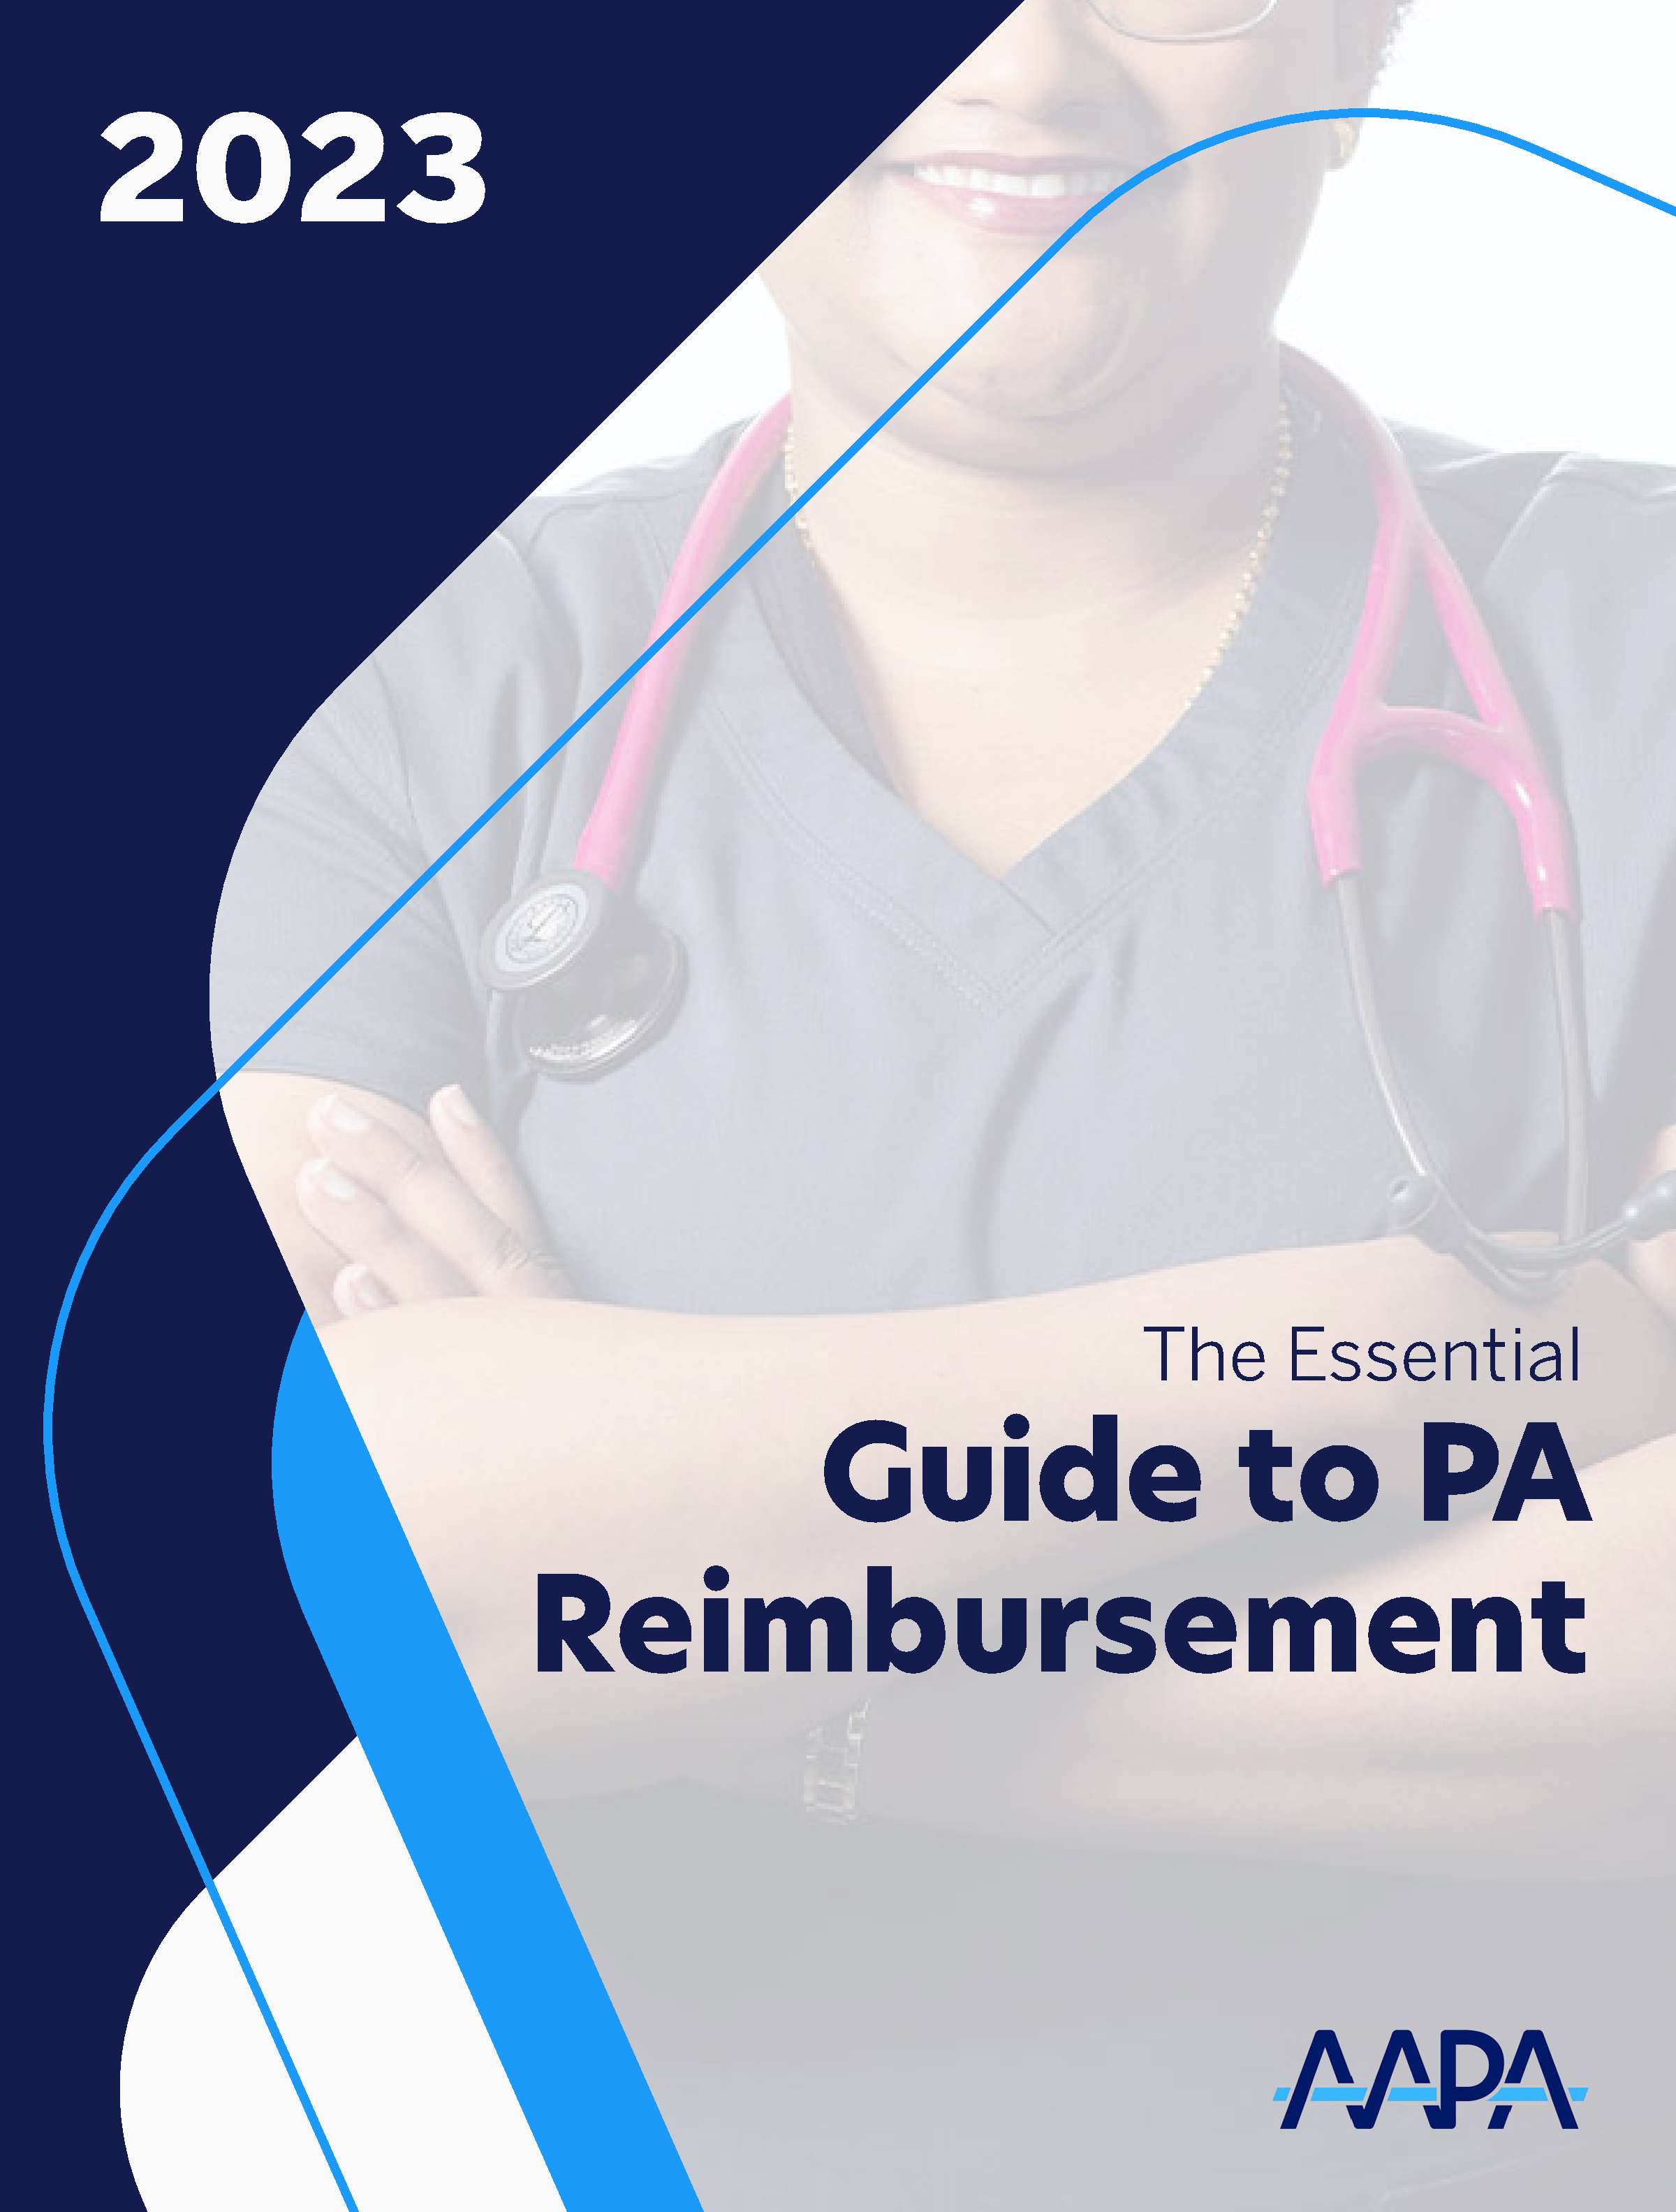 The Essential Guide to PA Reimbursement book cover